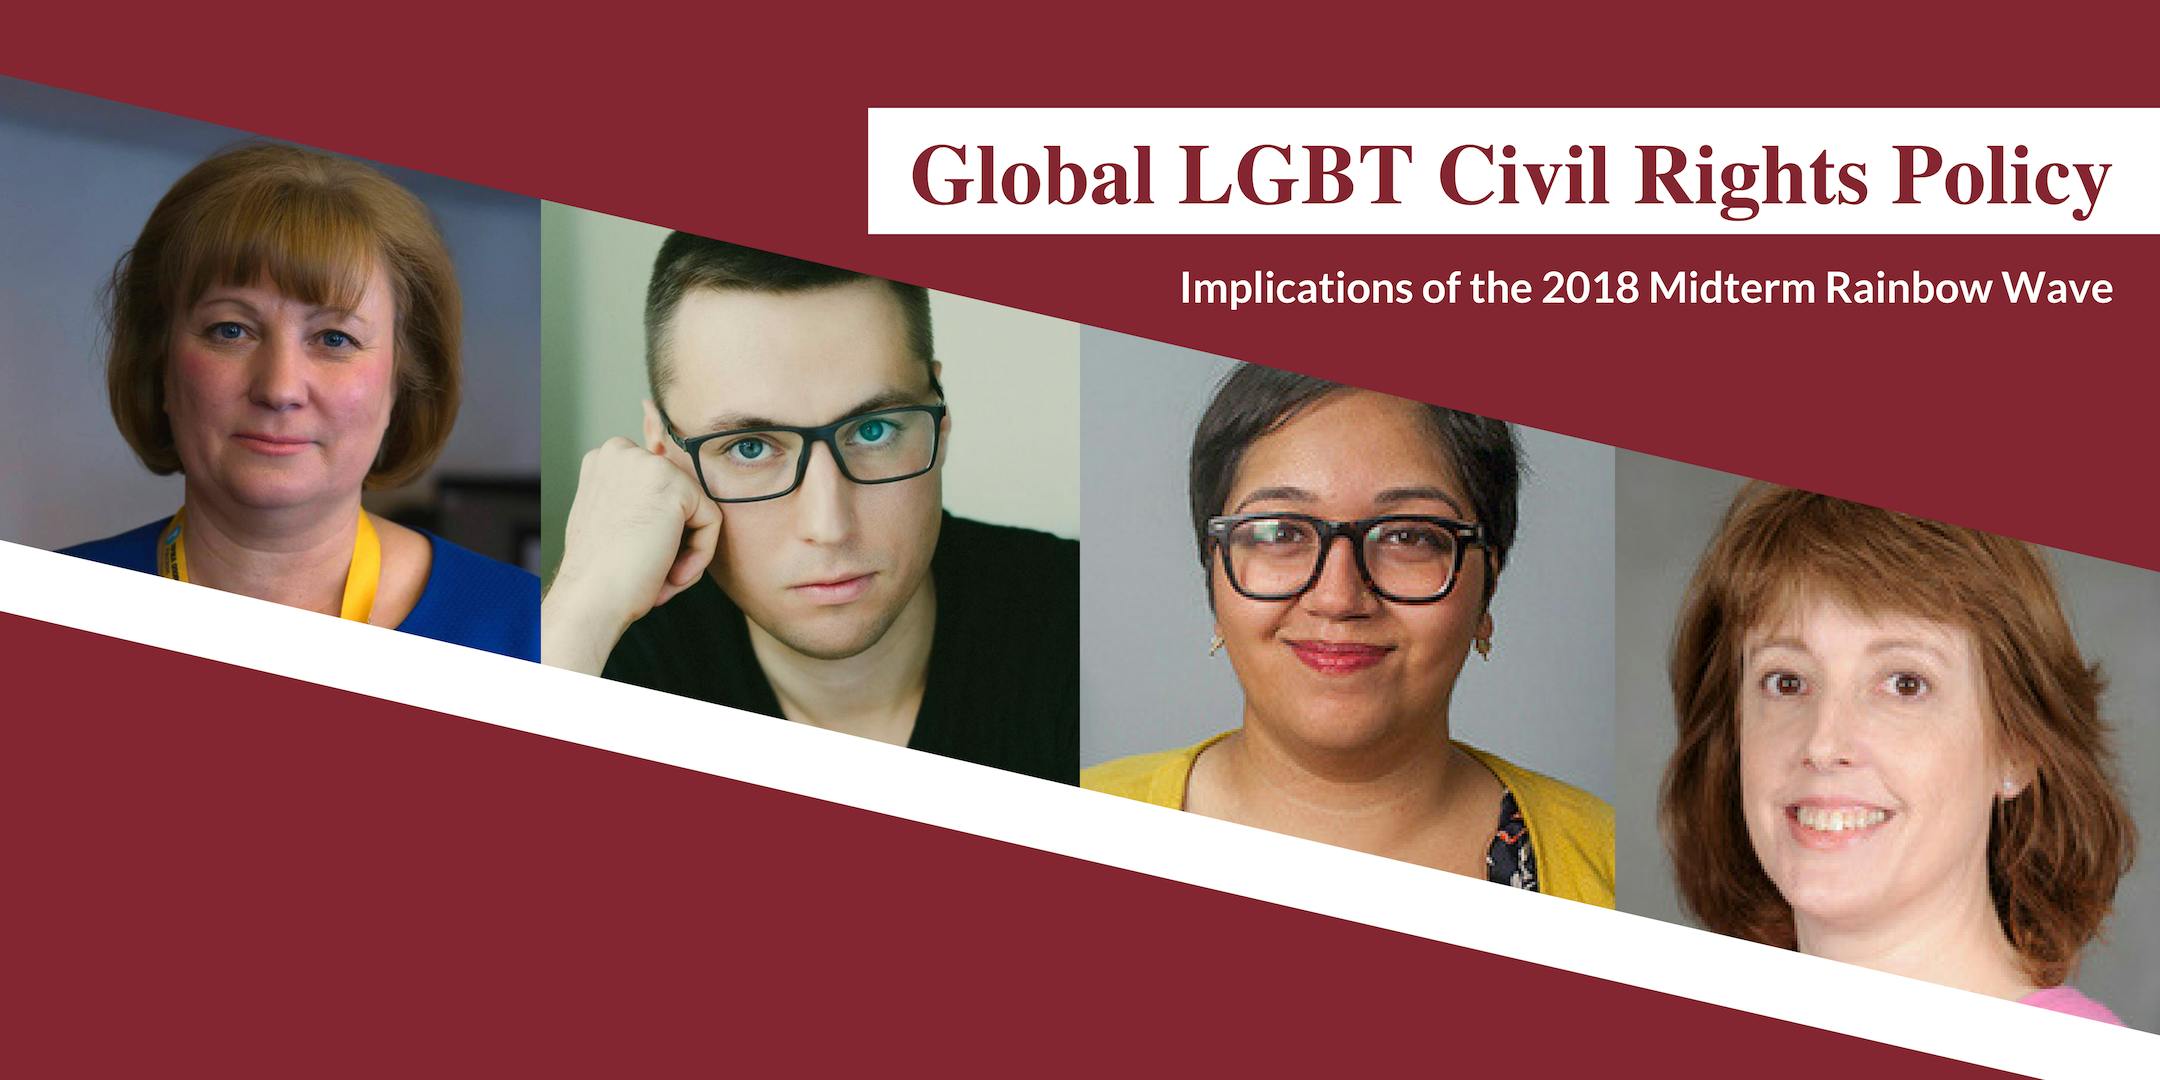 Global LGBT Civil Rights Policy: Implications of the 2018 Midterm Rainbow Wave